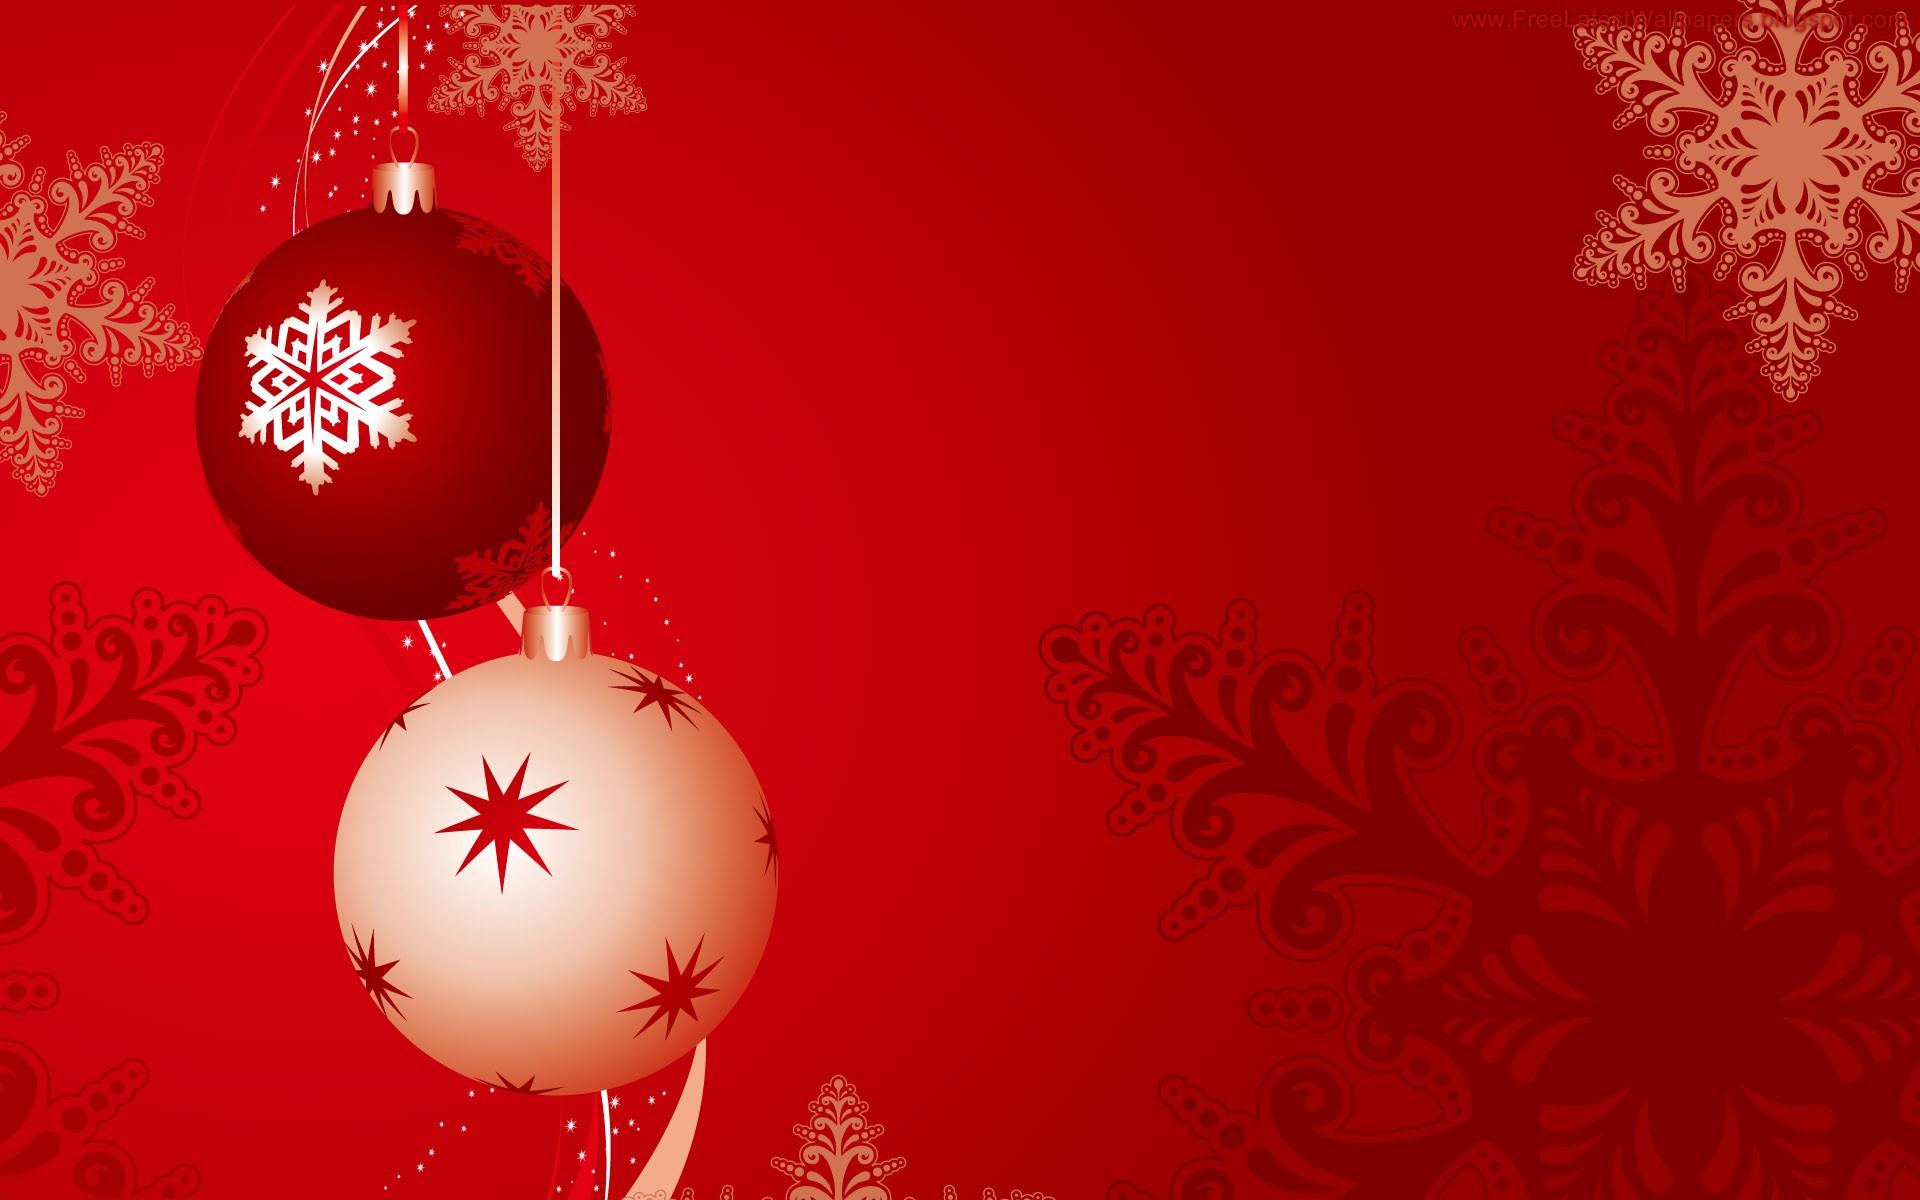 Free Holiday Backgrounds 18361 1920x1200 px